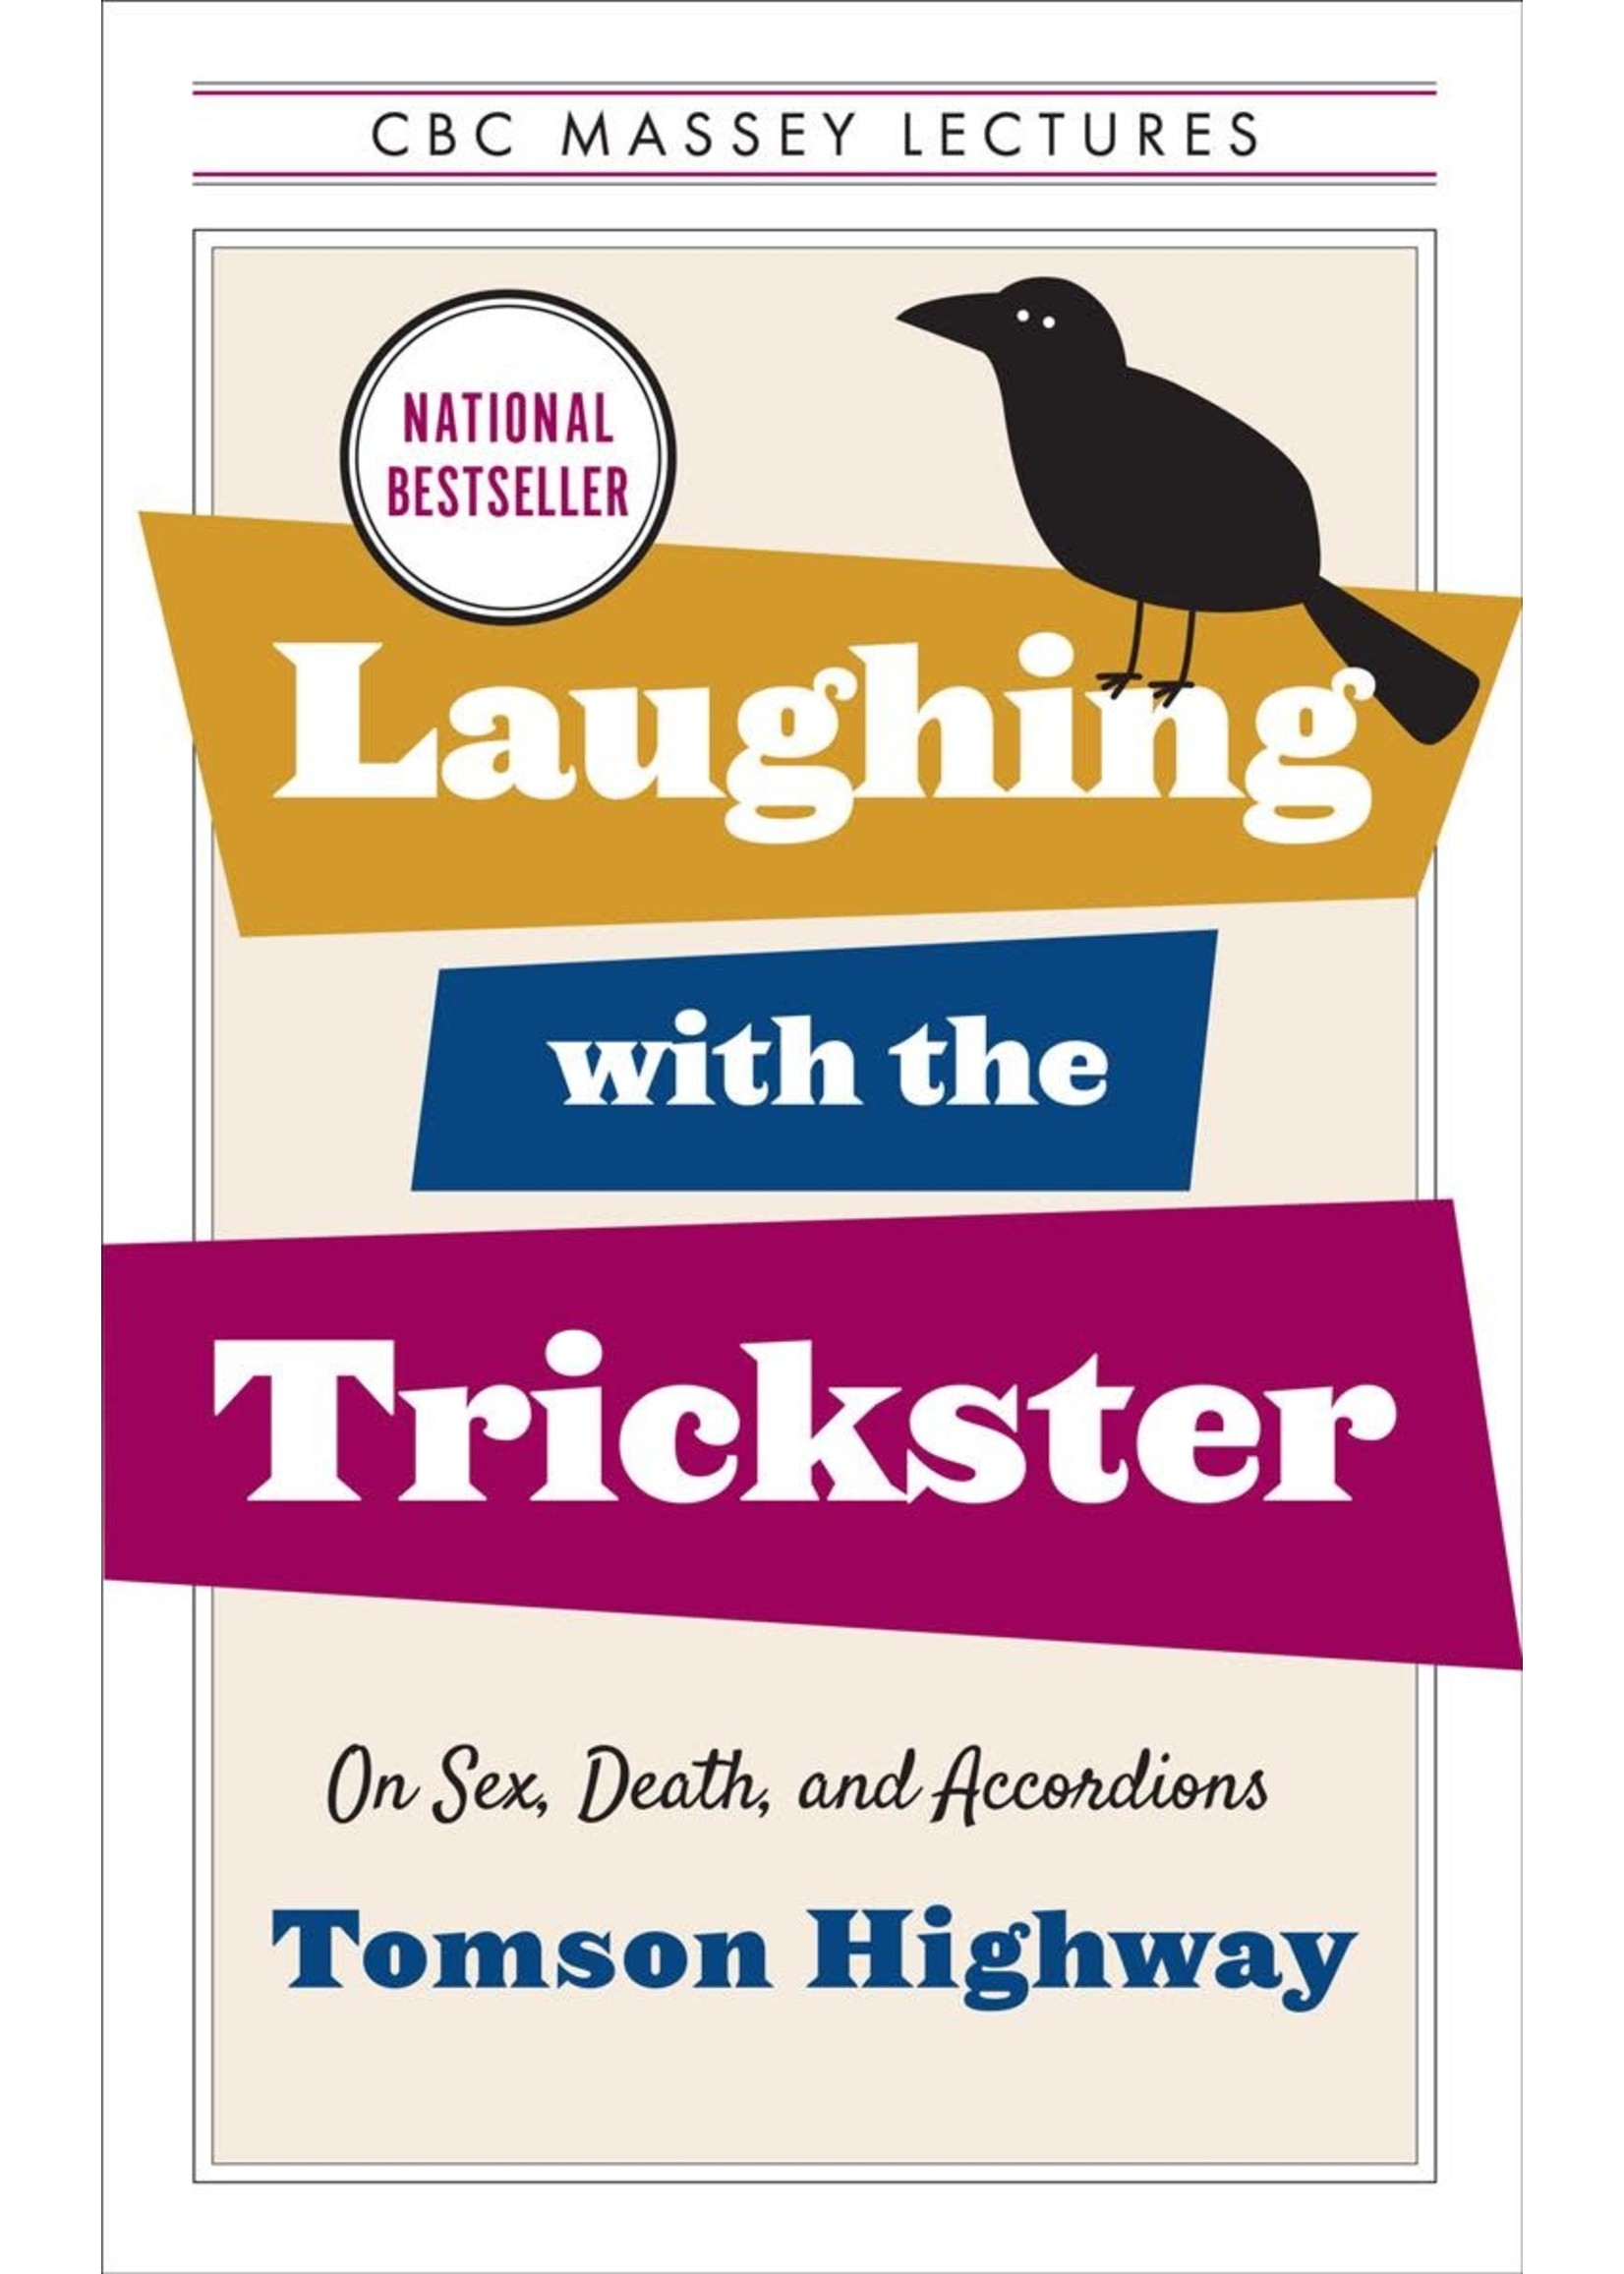 Laughing with the Trickster: On Sex, Death, and Accordions by Tomson Highway